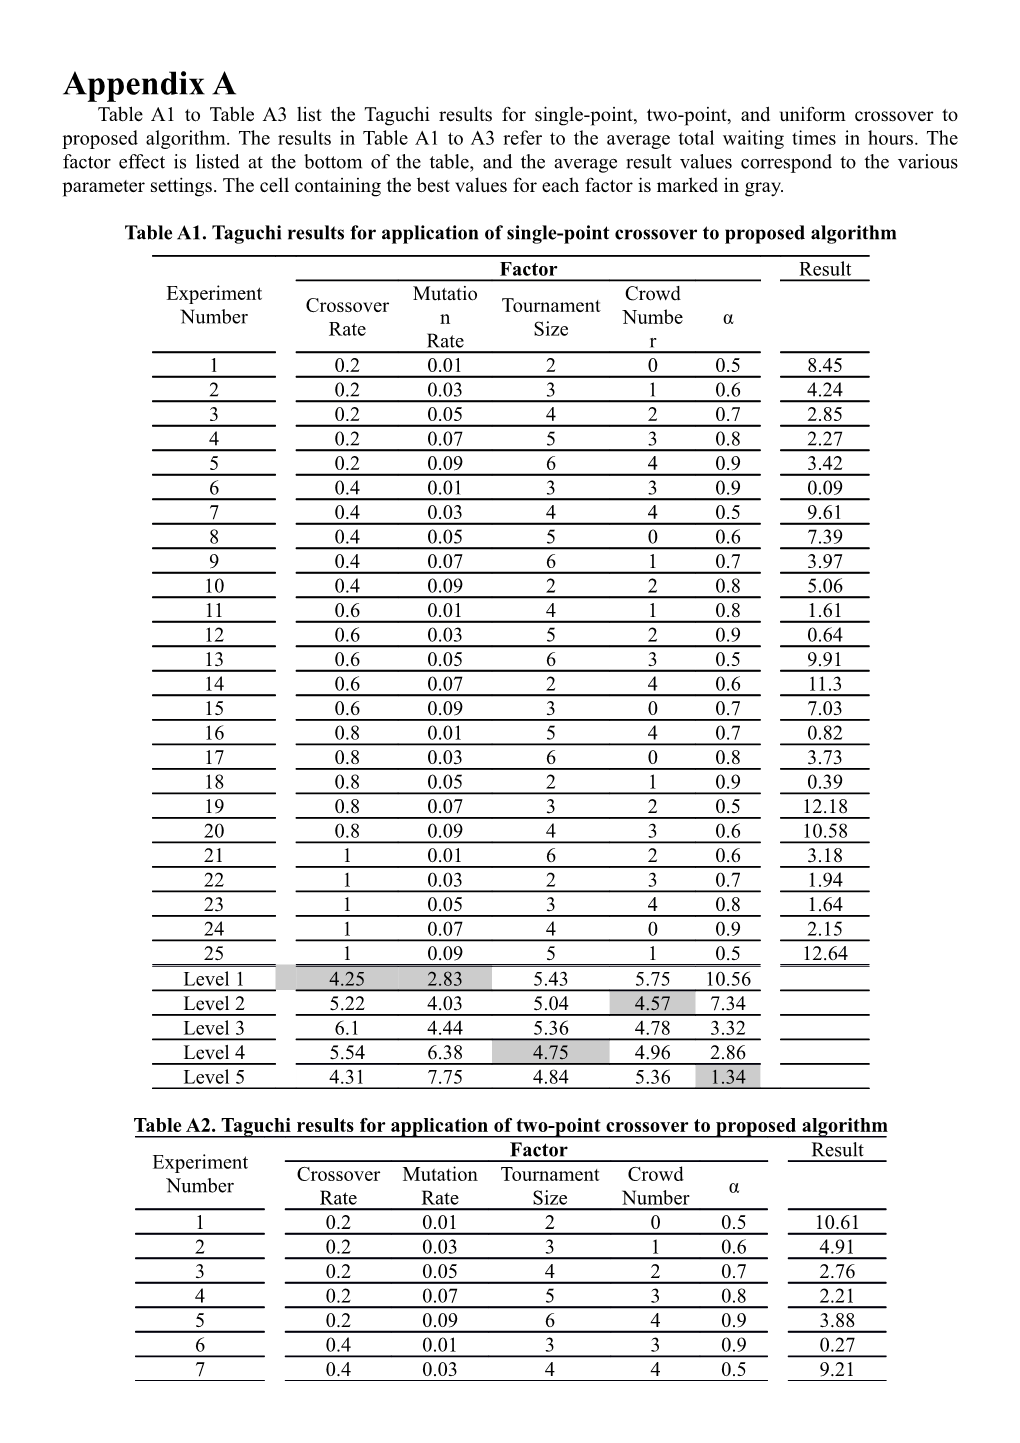 Table A1. Taguchi Resultsfor Application of Single-Point Crossover to Proposed Algorithm